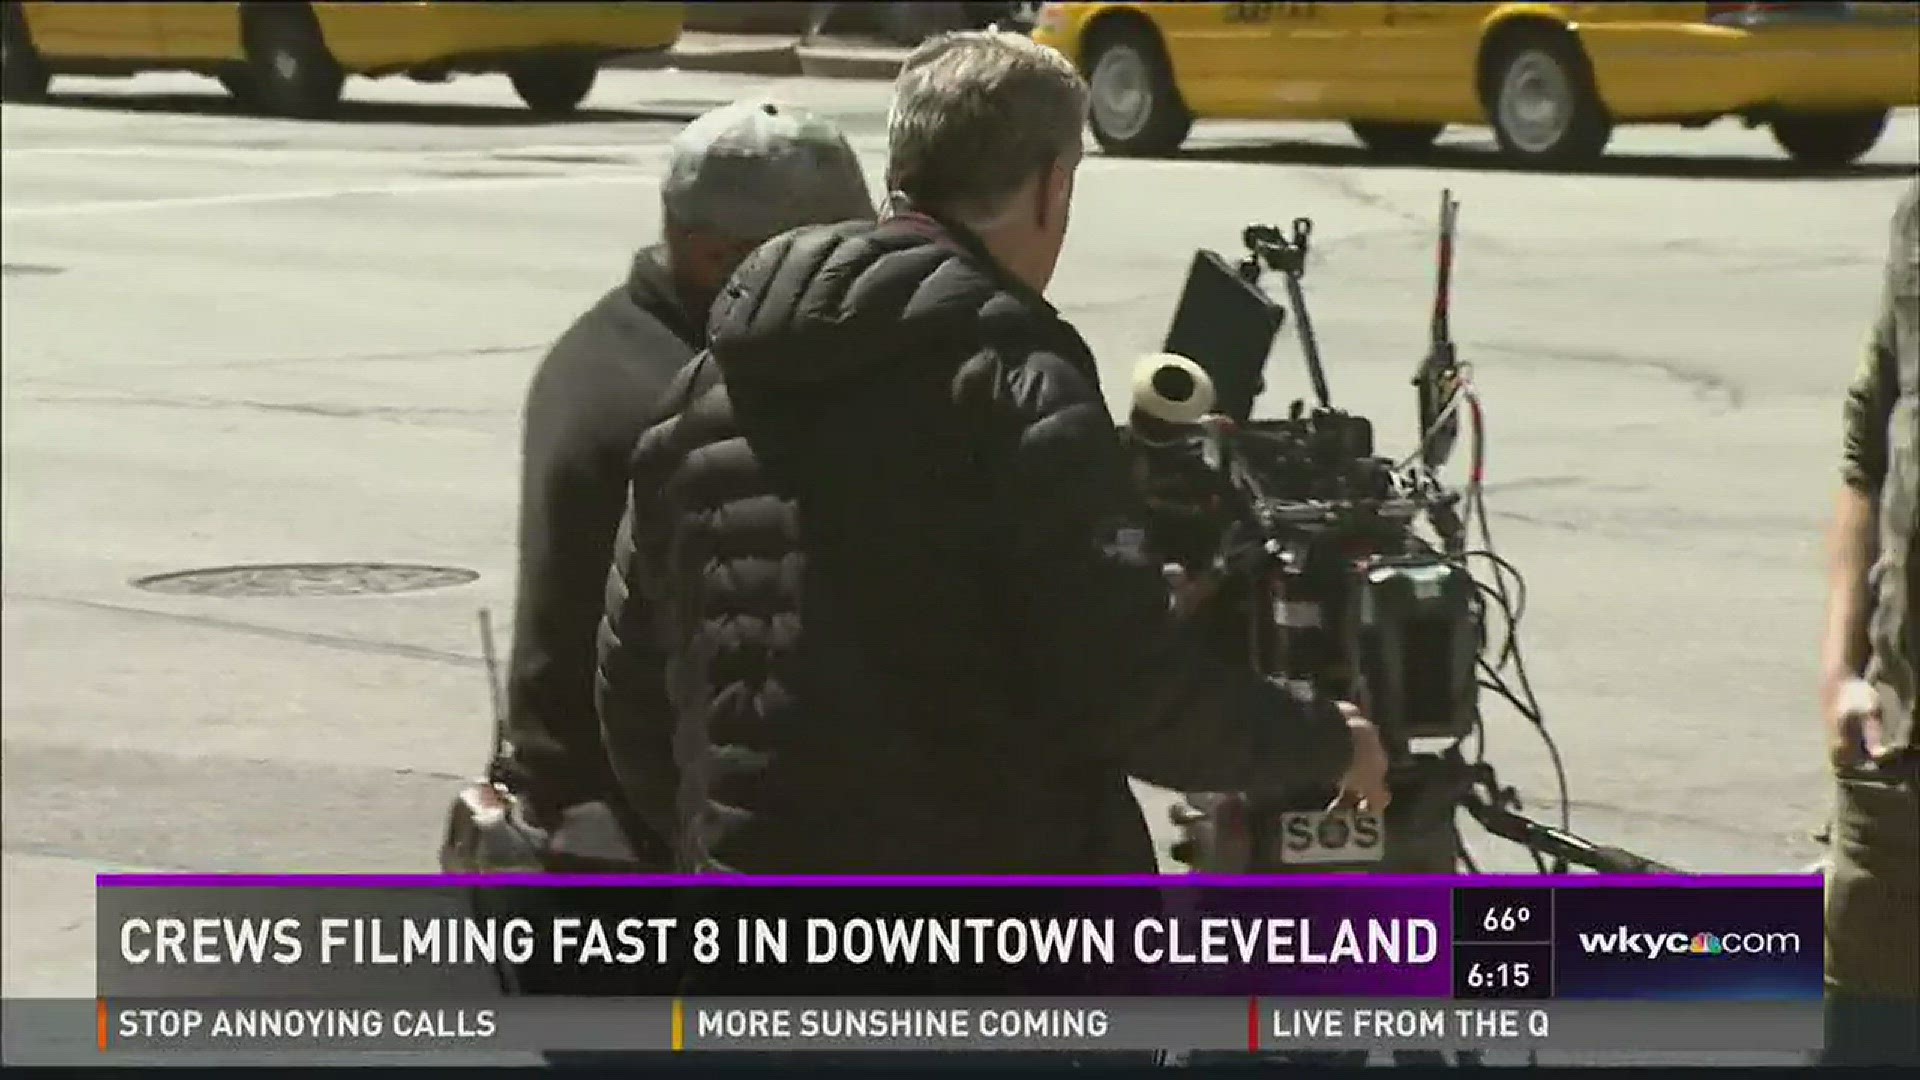 Crews filming Fast 8 in downtown Cleveland